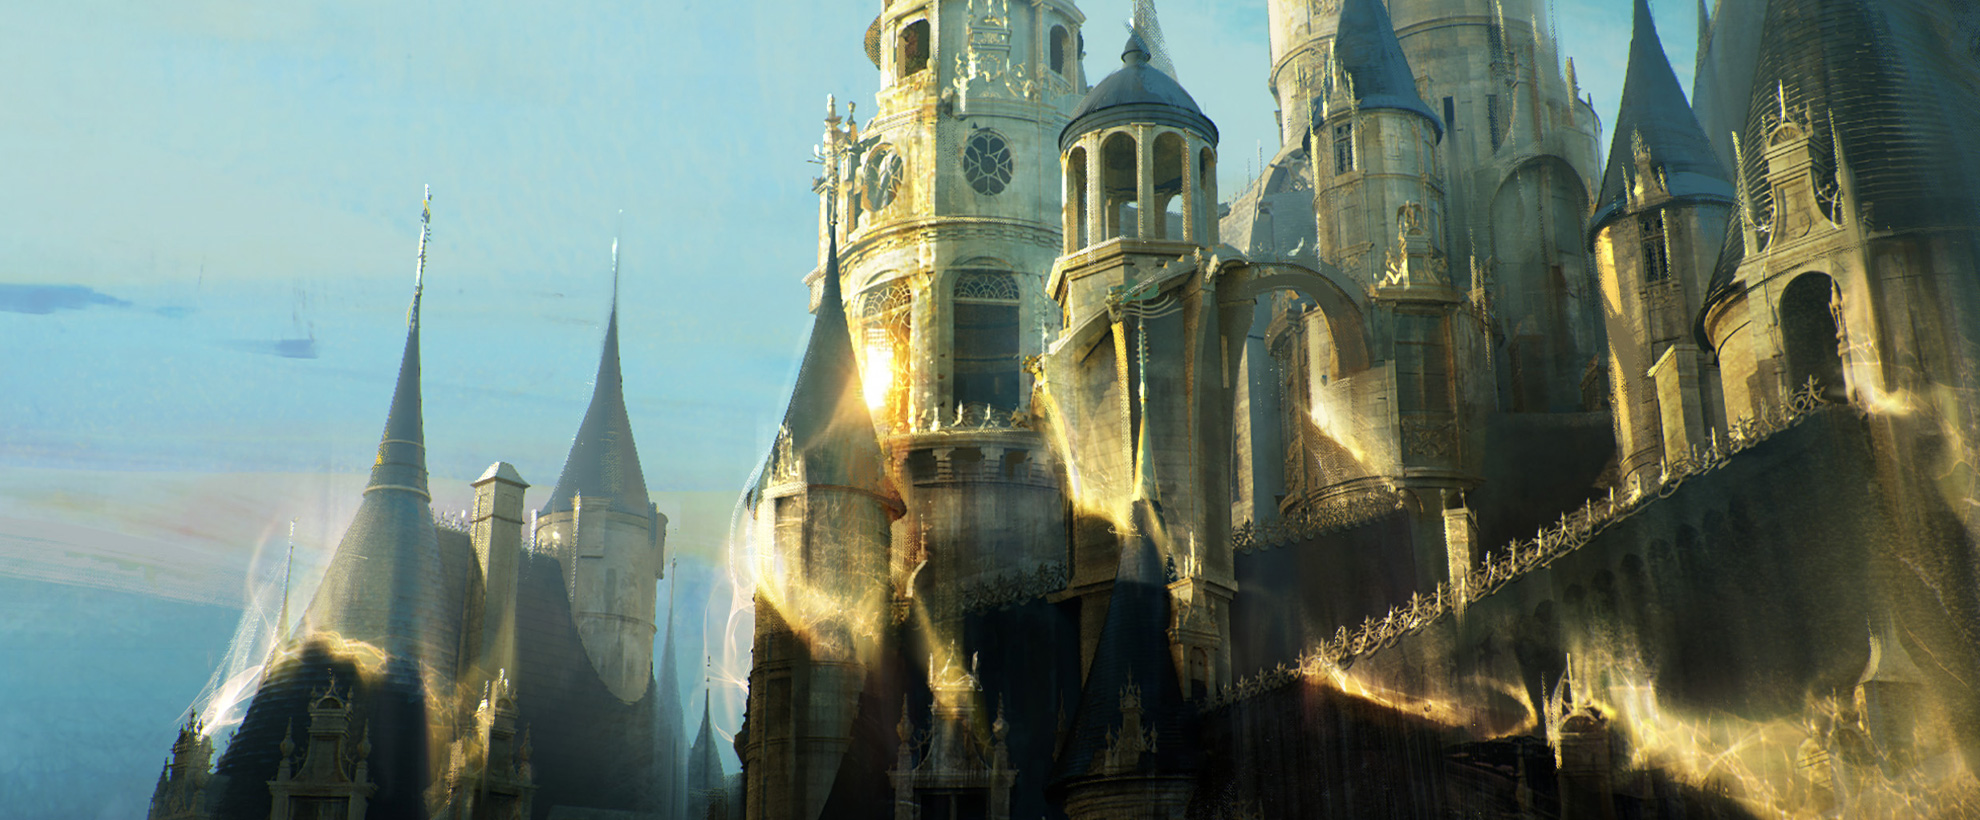 Concept Art for the castle in Beauty and the Beast